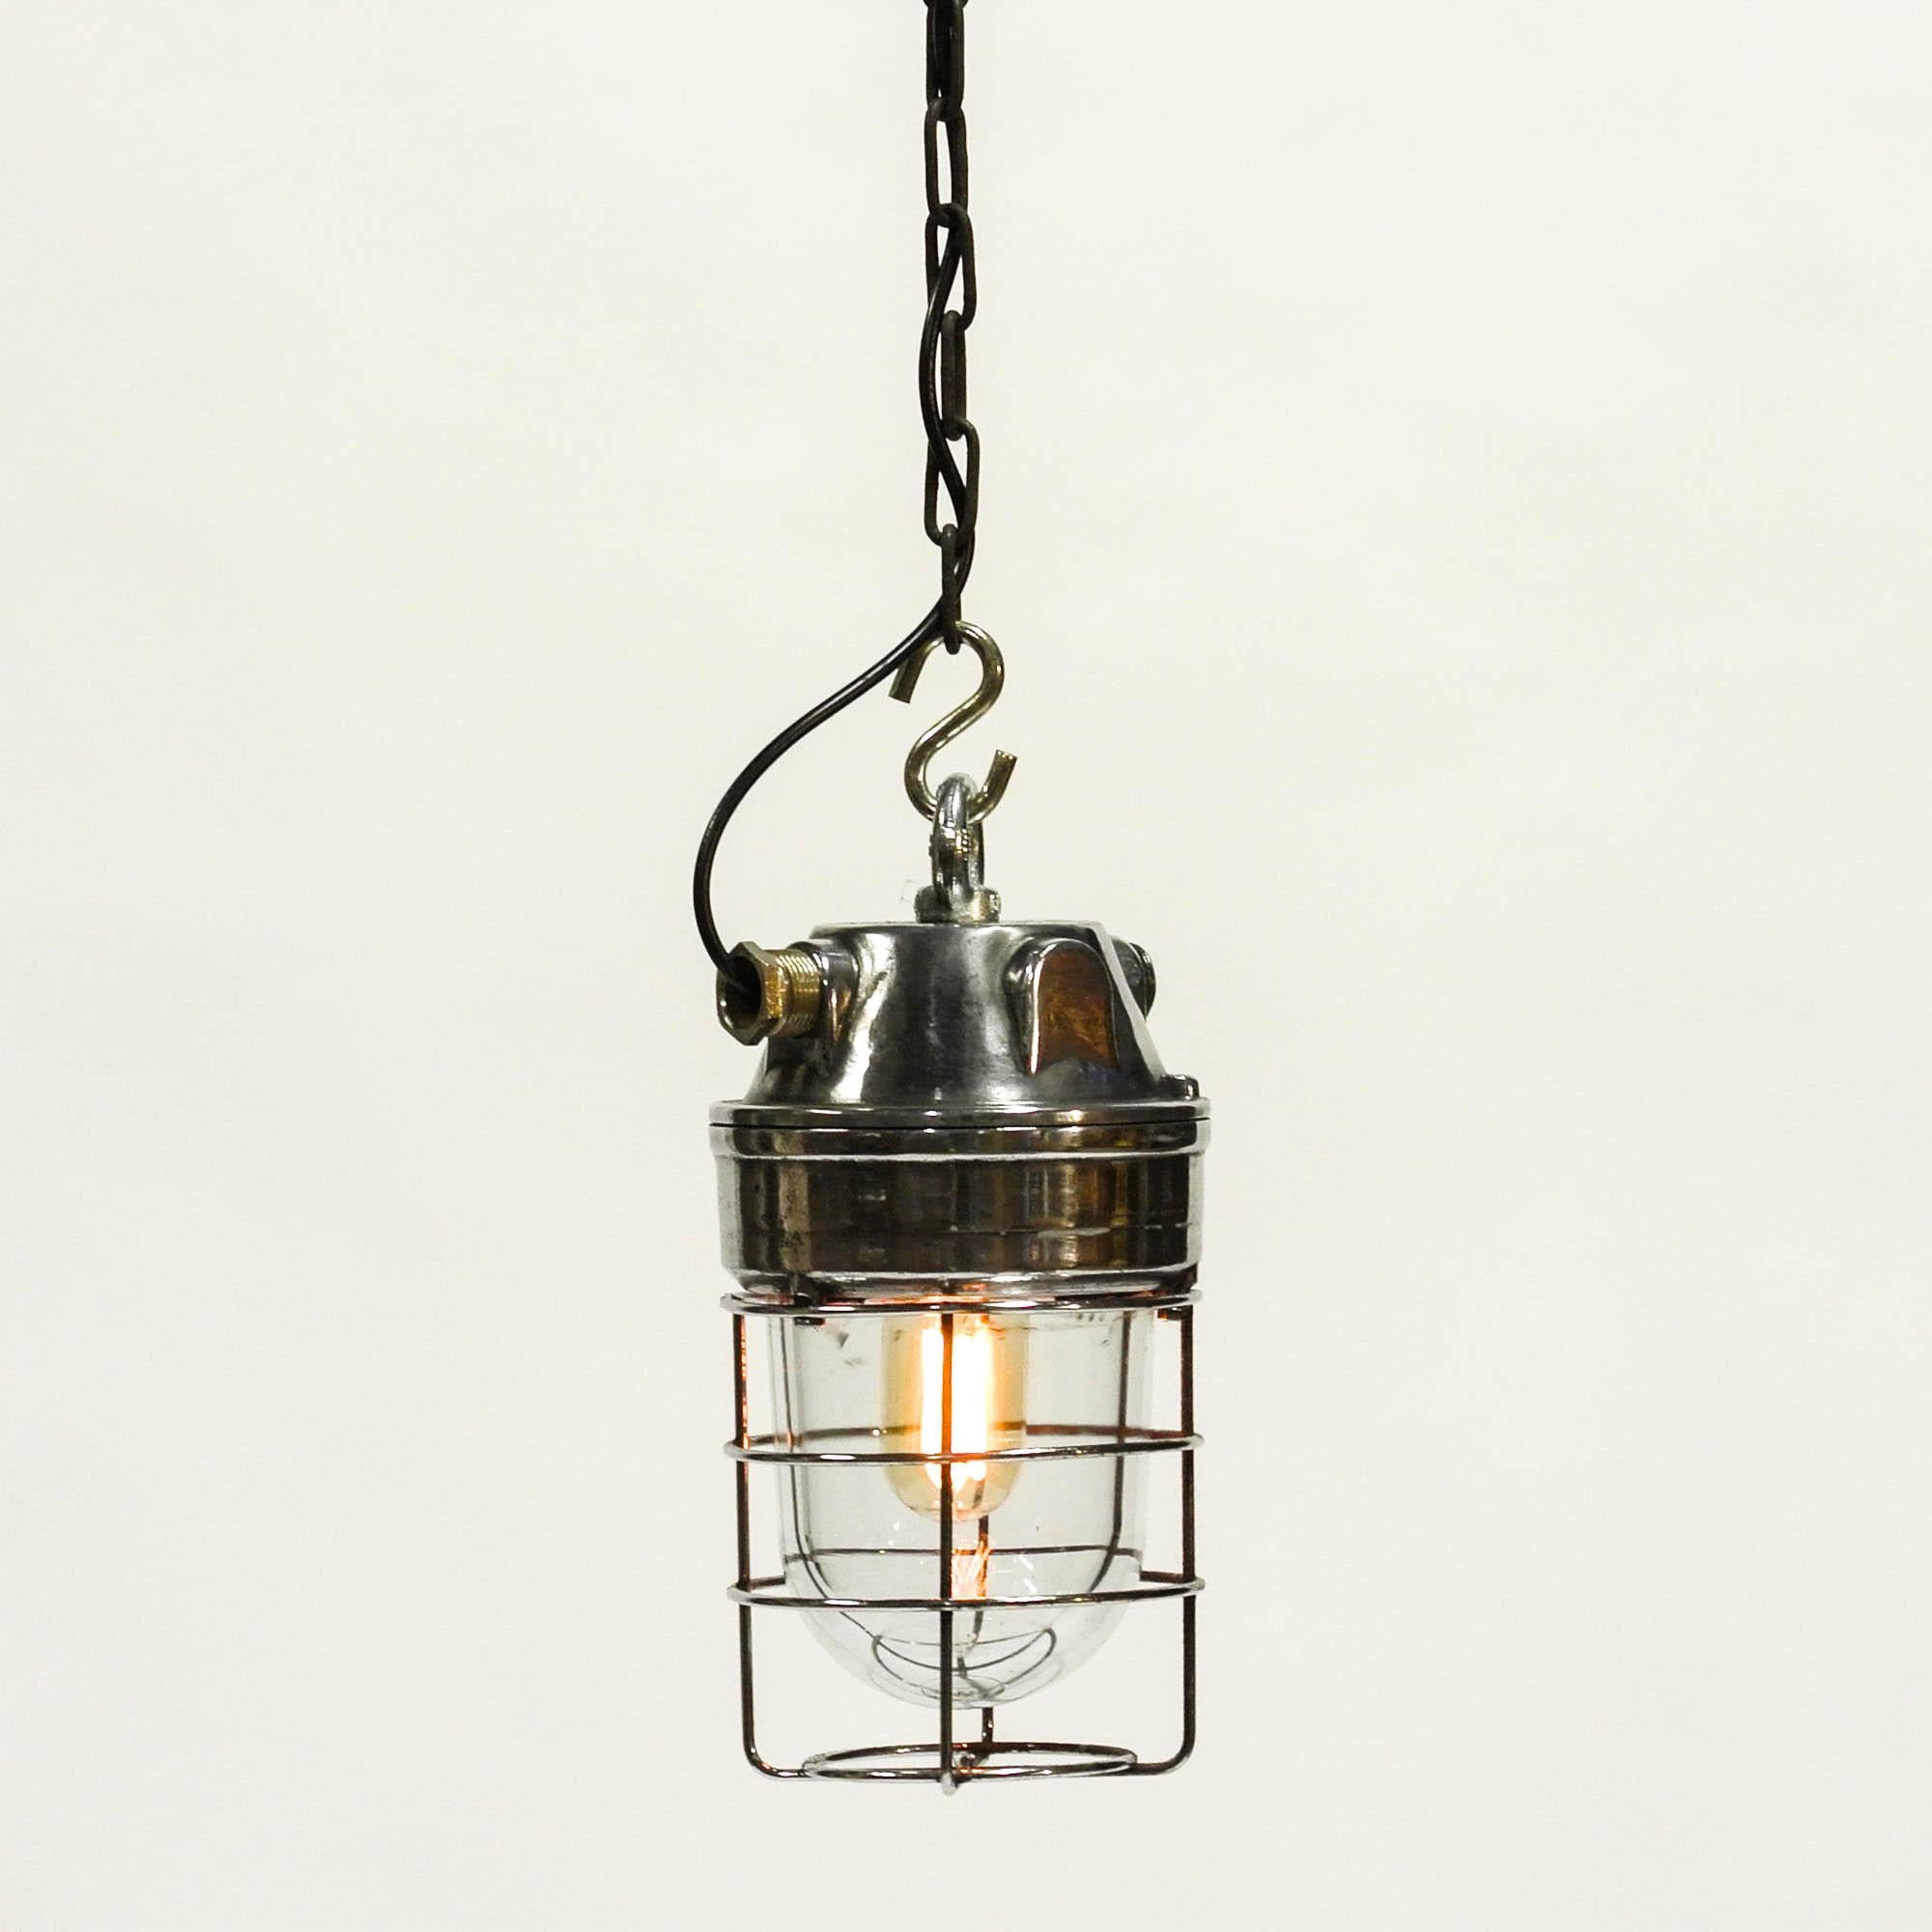 Old Italian ceiling lamp, from chemical industry, fully restored (stripped, brushed, polished, varnished and rewired). Thick explosion-proof glass protected by a steel grid, head lamp in cast aluminium. Nice proportions.

 